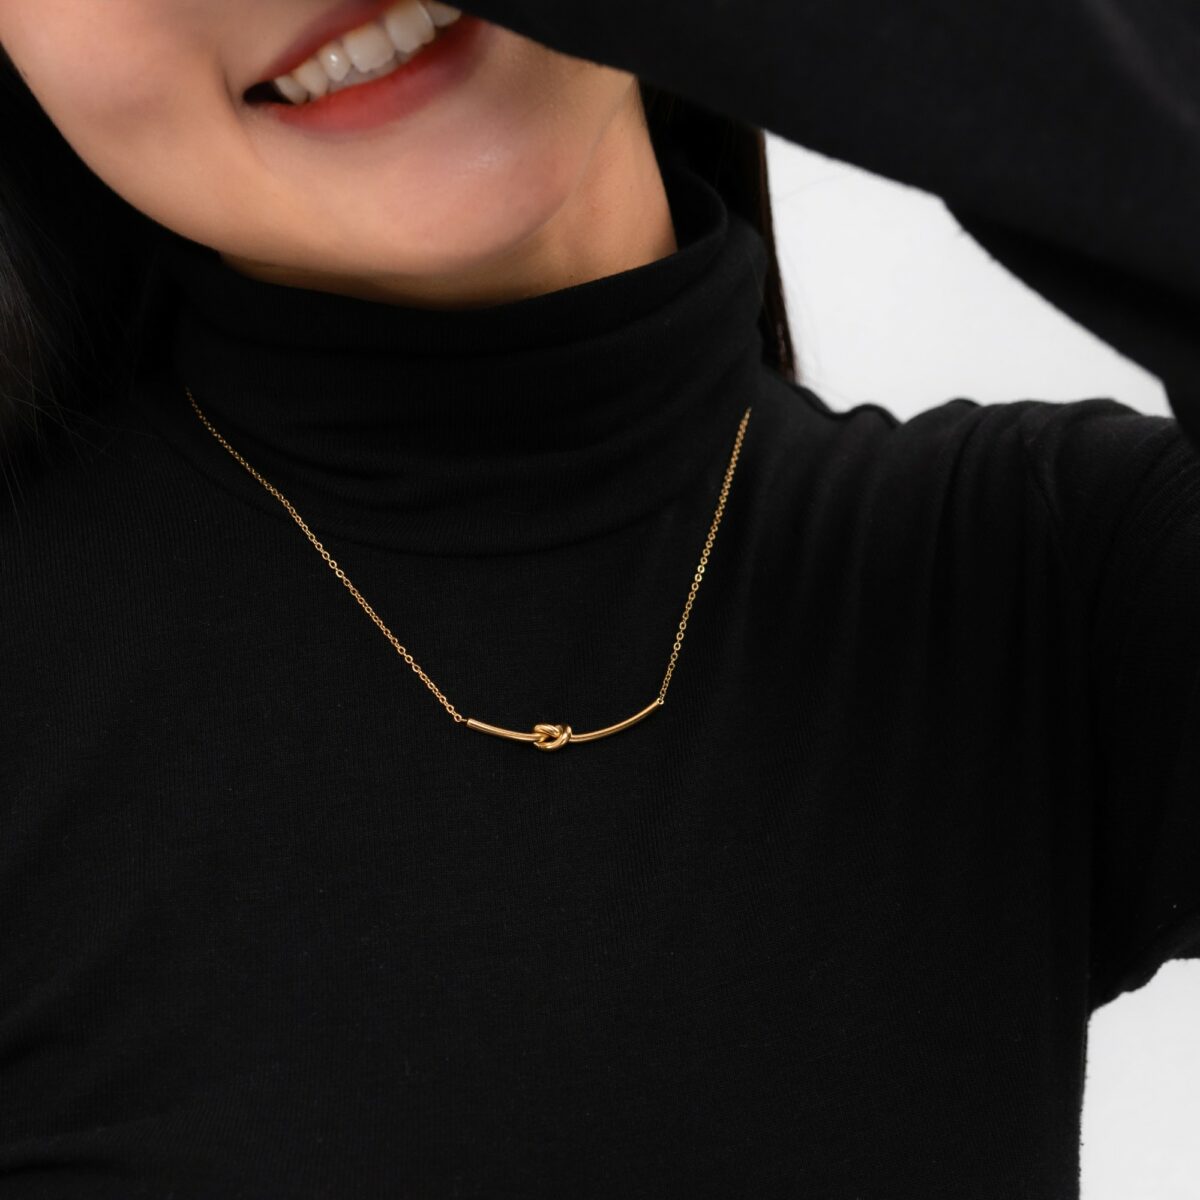 https://m.clubbella.co/product/smiley-knot-gold-necklace/ DSC06630-1